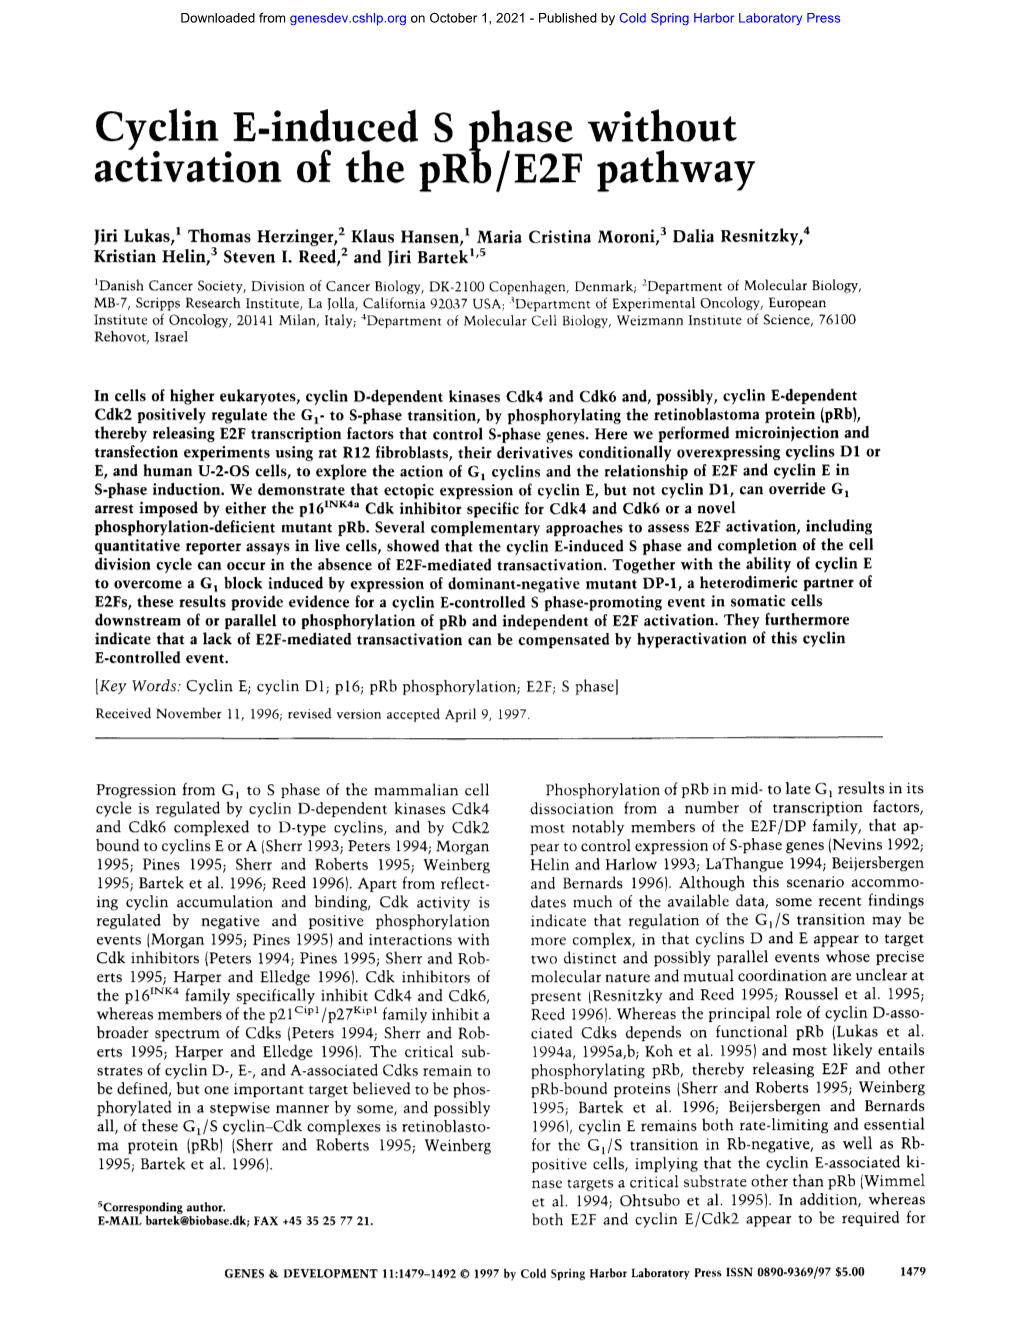 Cyclin E-Induced S Phase Without Activation of the Prb/E2F Pathway